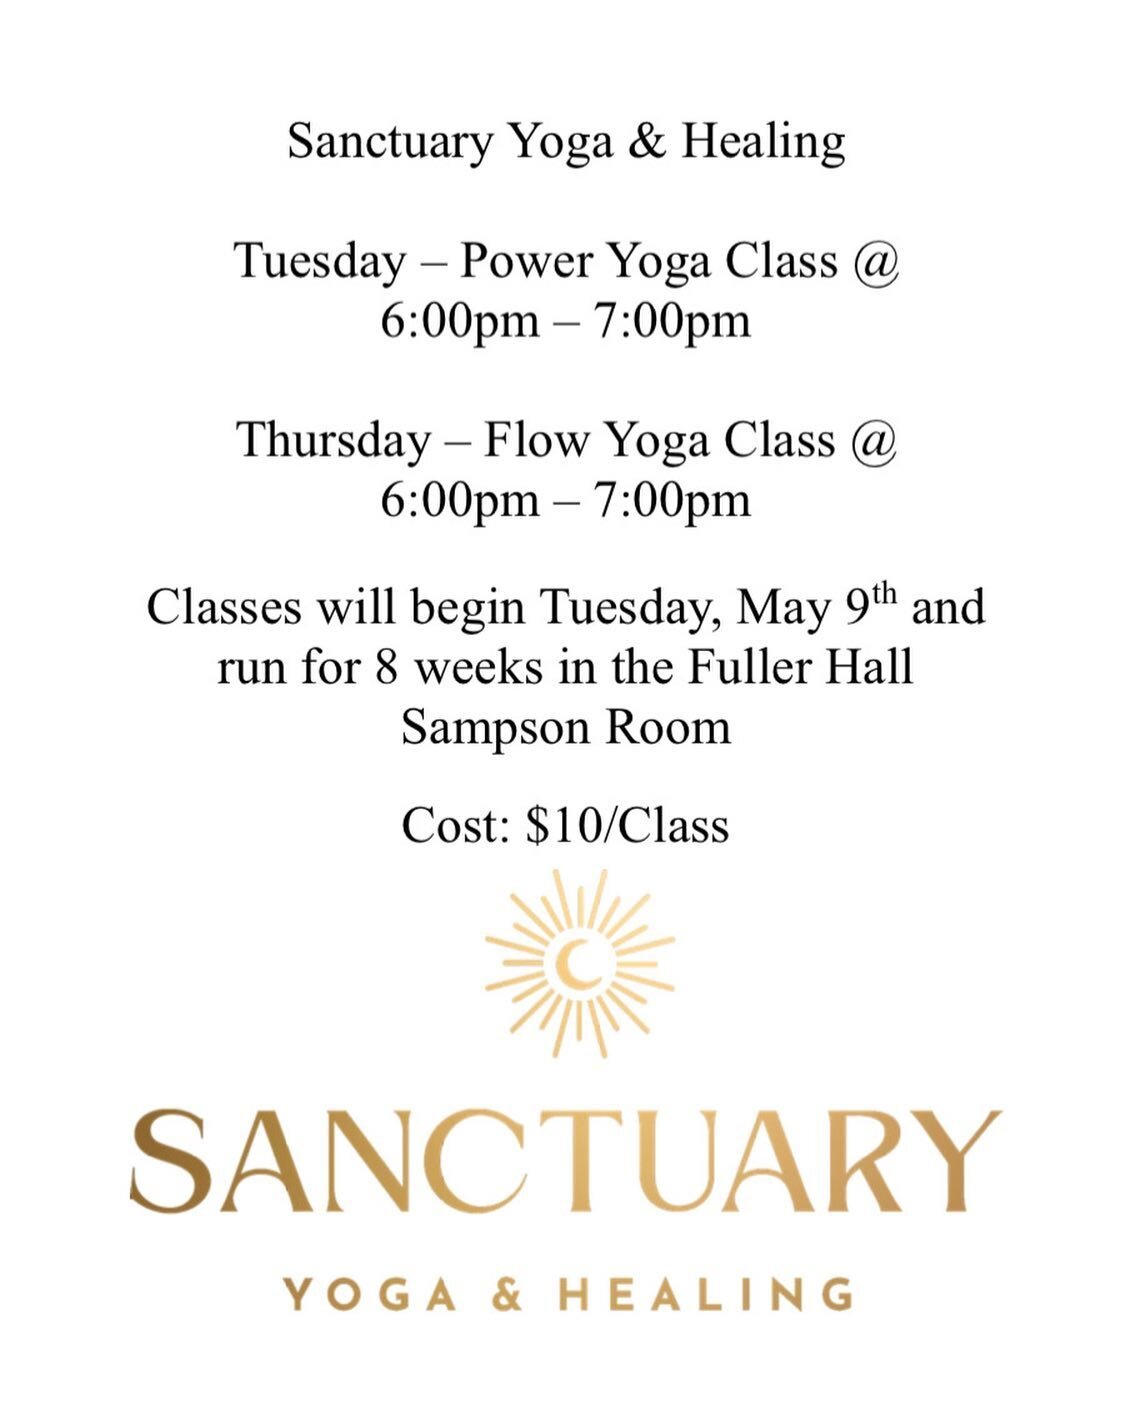 Join us Tuesdays and Thursdays starting May 9th! Class descriptions 👇🏻
⠀⠀⠀⠀⠀⠀⠀⠀⠀
✨Power Tuesdays✨
Power yoga is designed specifically to improve muscle strength and cardiovascular endurance. The poses are challenging, and you move from one to the n